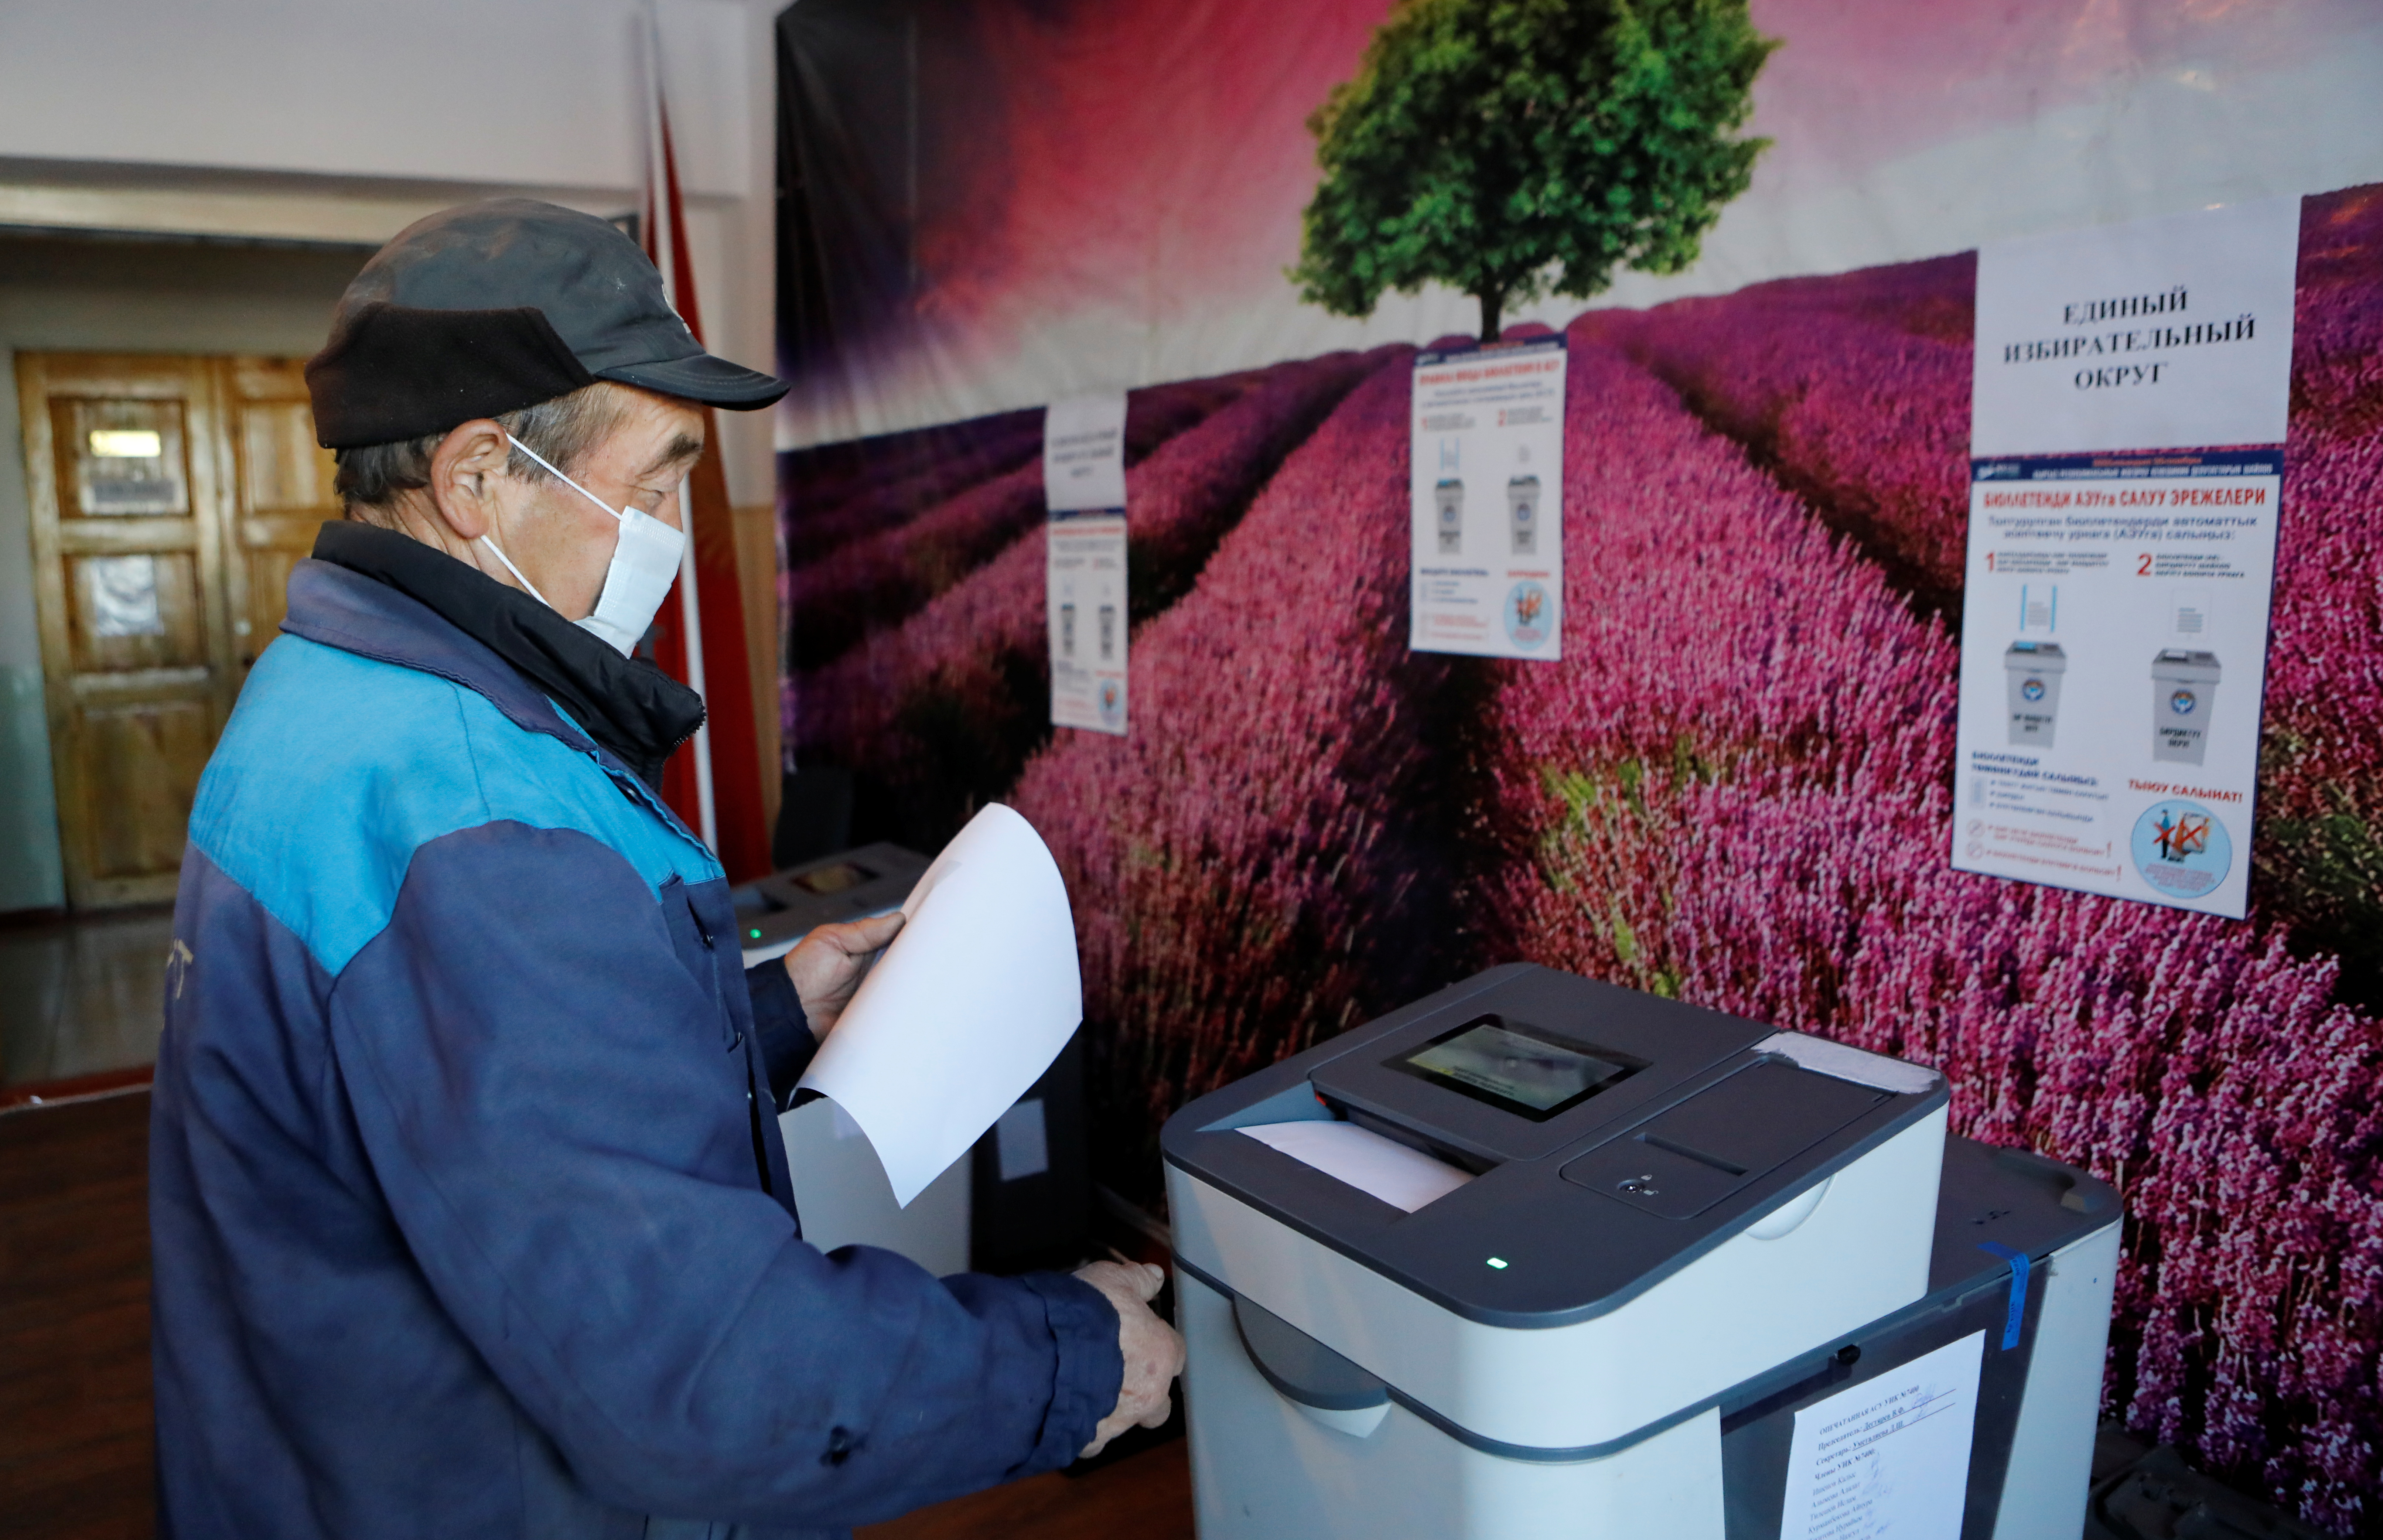 A man casts his ballots at a polling station during the parliamentary election in the settlement of Arashan outside Bishkek, Kyrgyzstan, November 28, 2021. REUTERS/Vladimir Pirogov